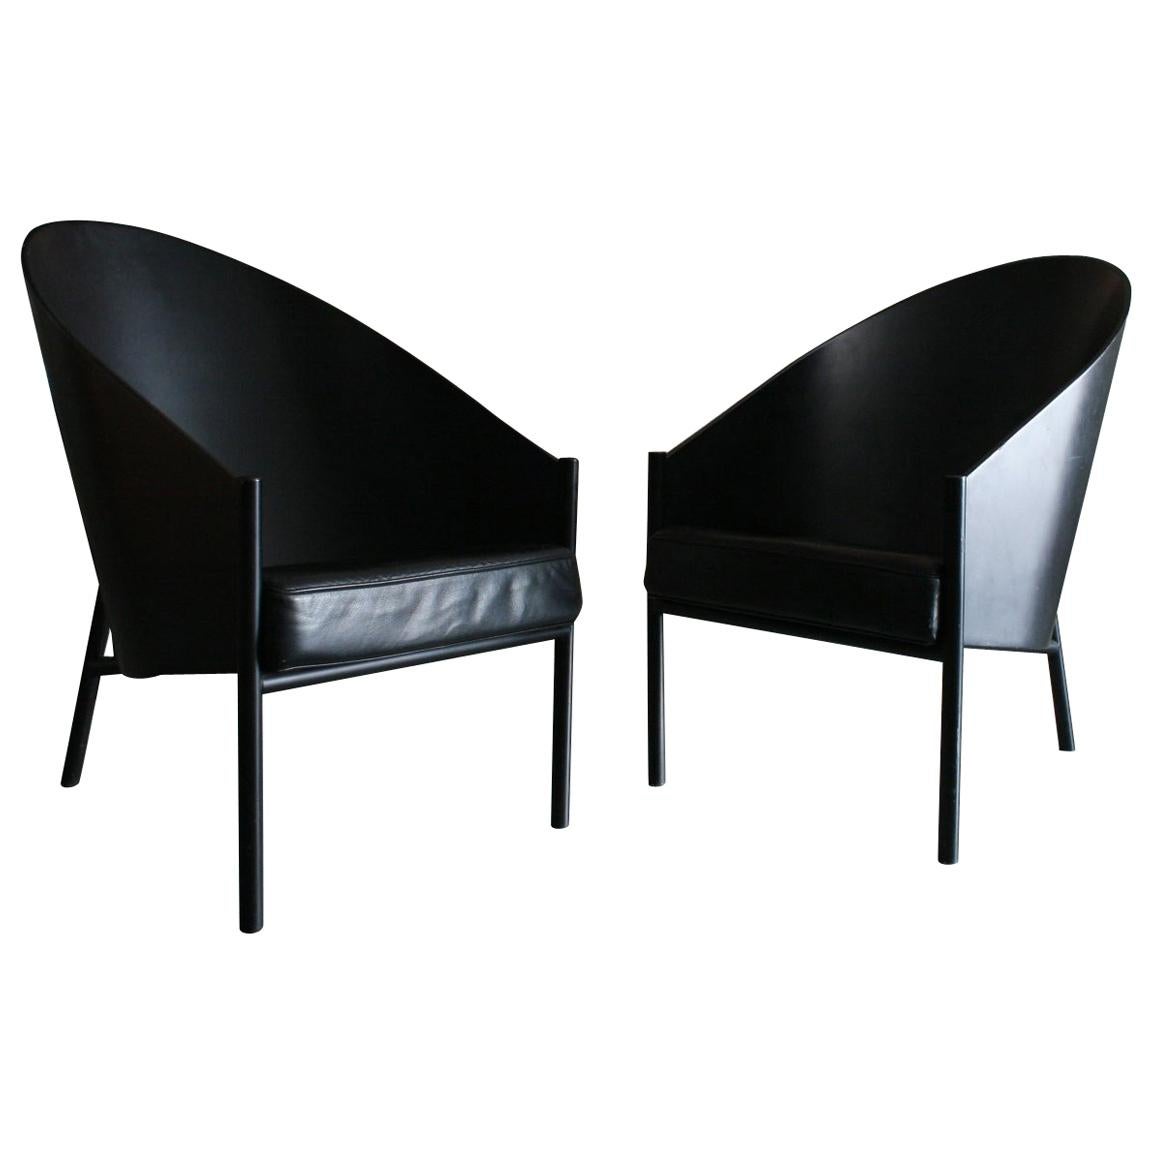 Pair of Original Pratfall Lounge Chairs by Philippe Starck for Aleph Ubik